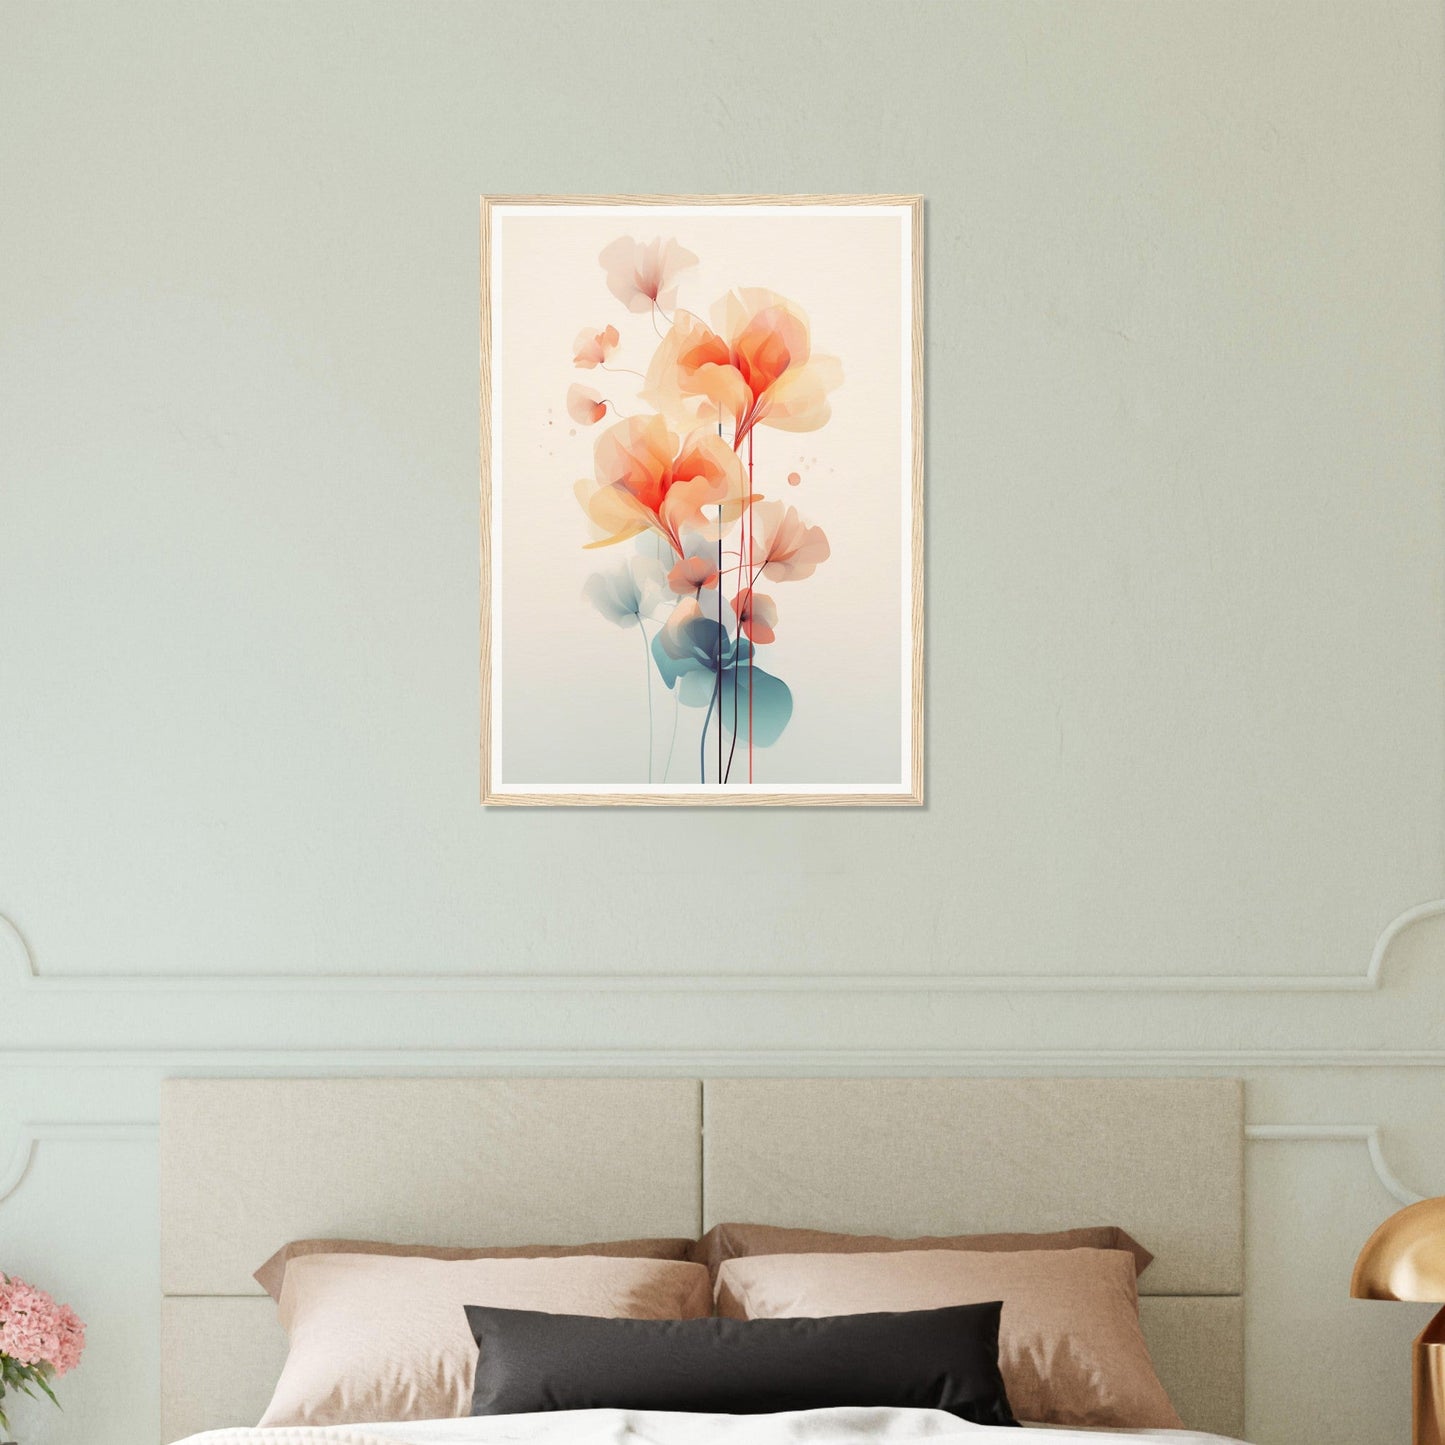 An Flowers Abstract Geometry J The Oracle Windows™ Collection poster framed in wood, perfect for my wall.